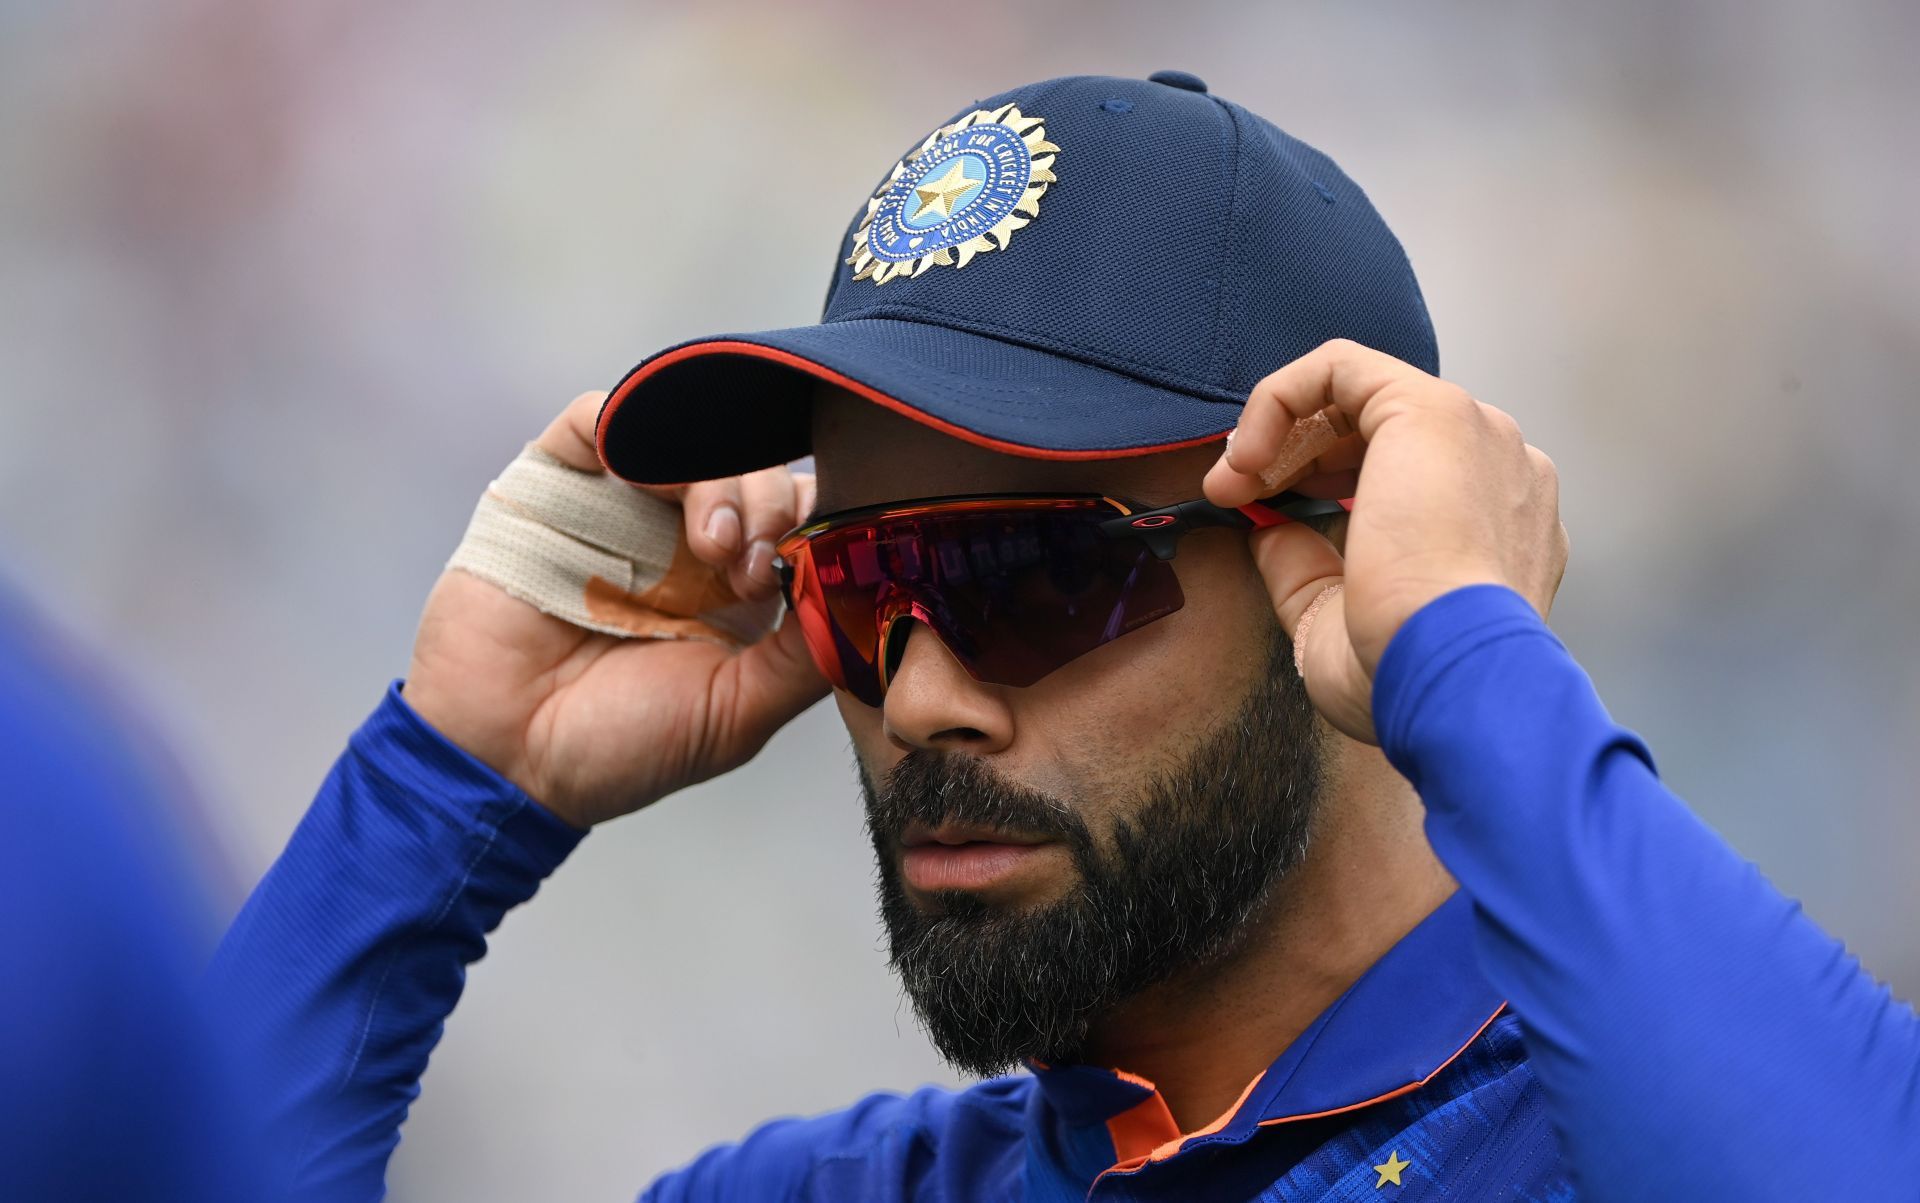 Aakash Chopra feels Virat Kohli is too good a player to not figure out his issues. (P.C.:Getty)